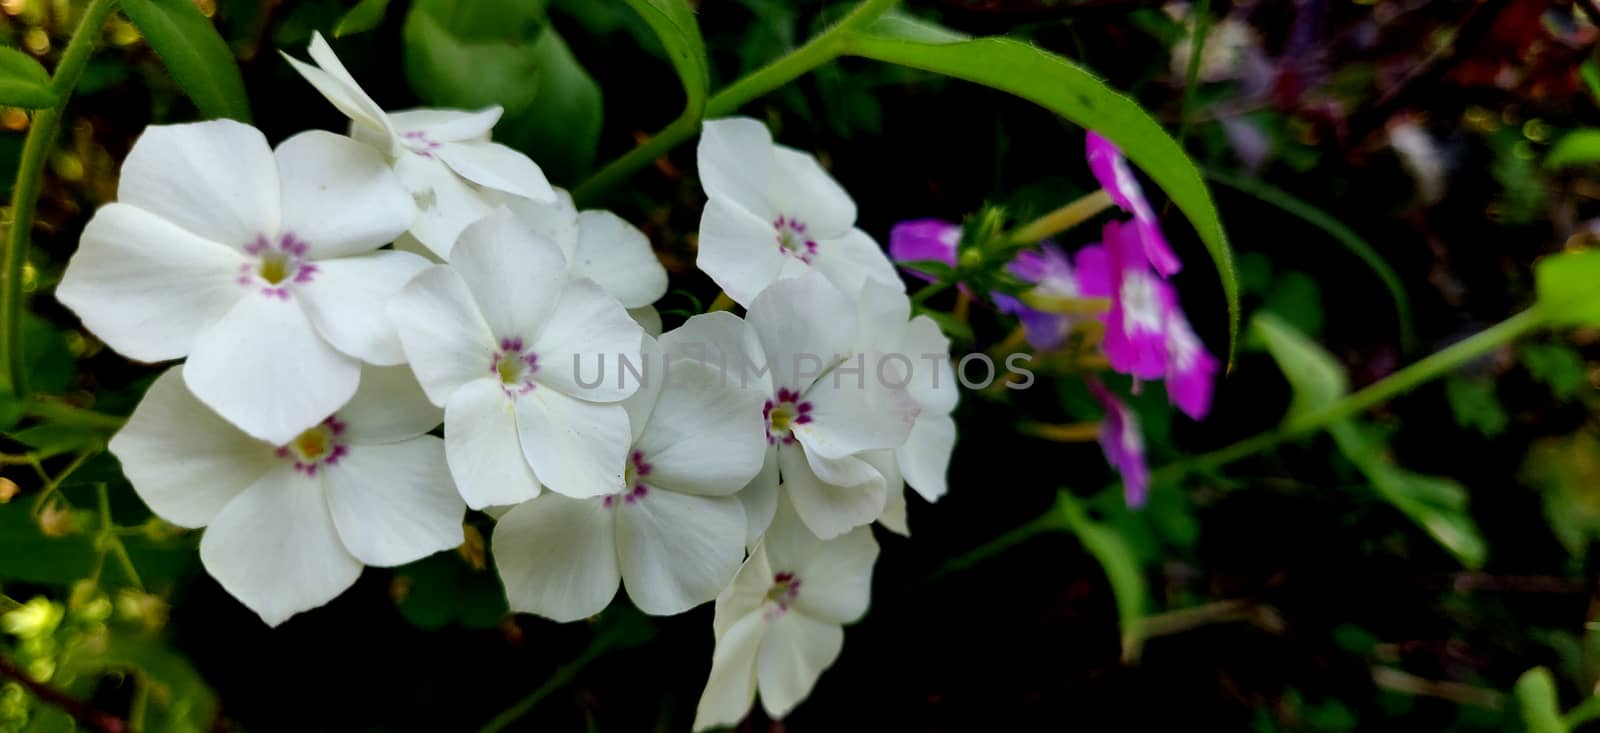 Garden phlox white flowers in a bunch blooming in the summers of India